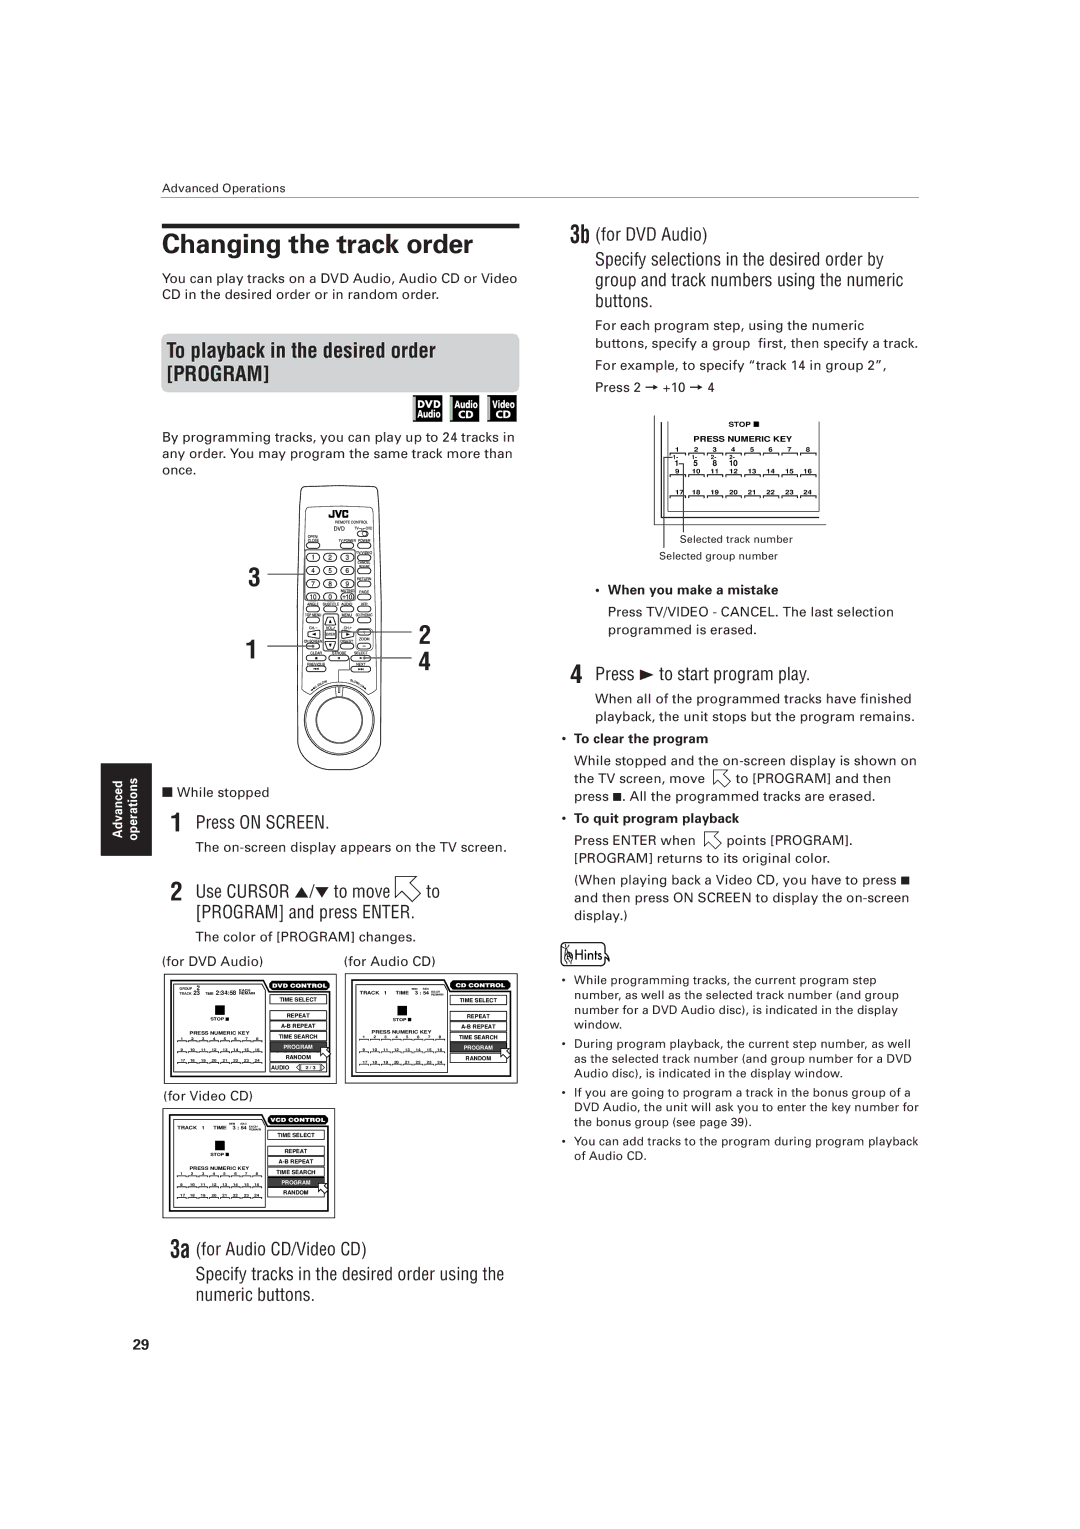 JVC XV-D721BK manual Changing the track order, To playback in the desired order Program, Use Cursor 5/ to move 